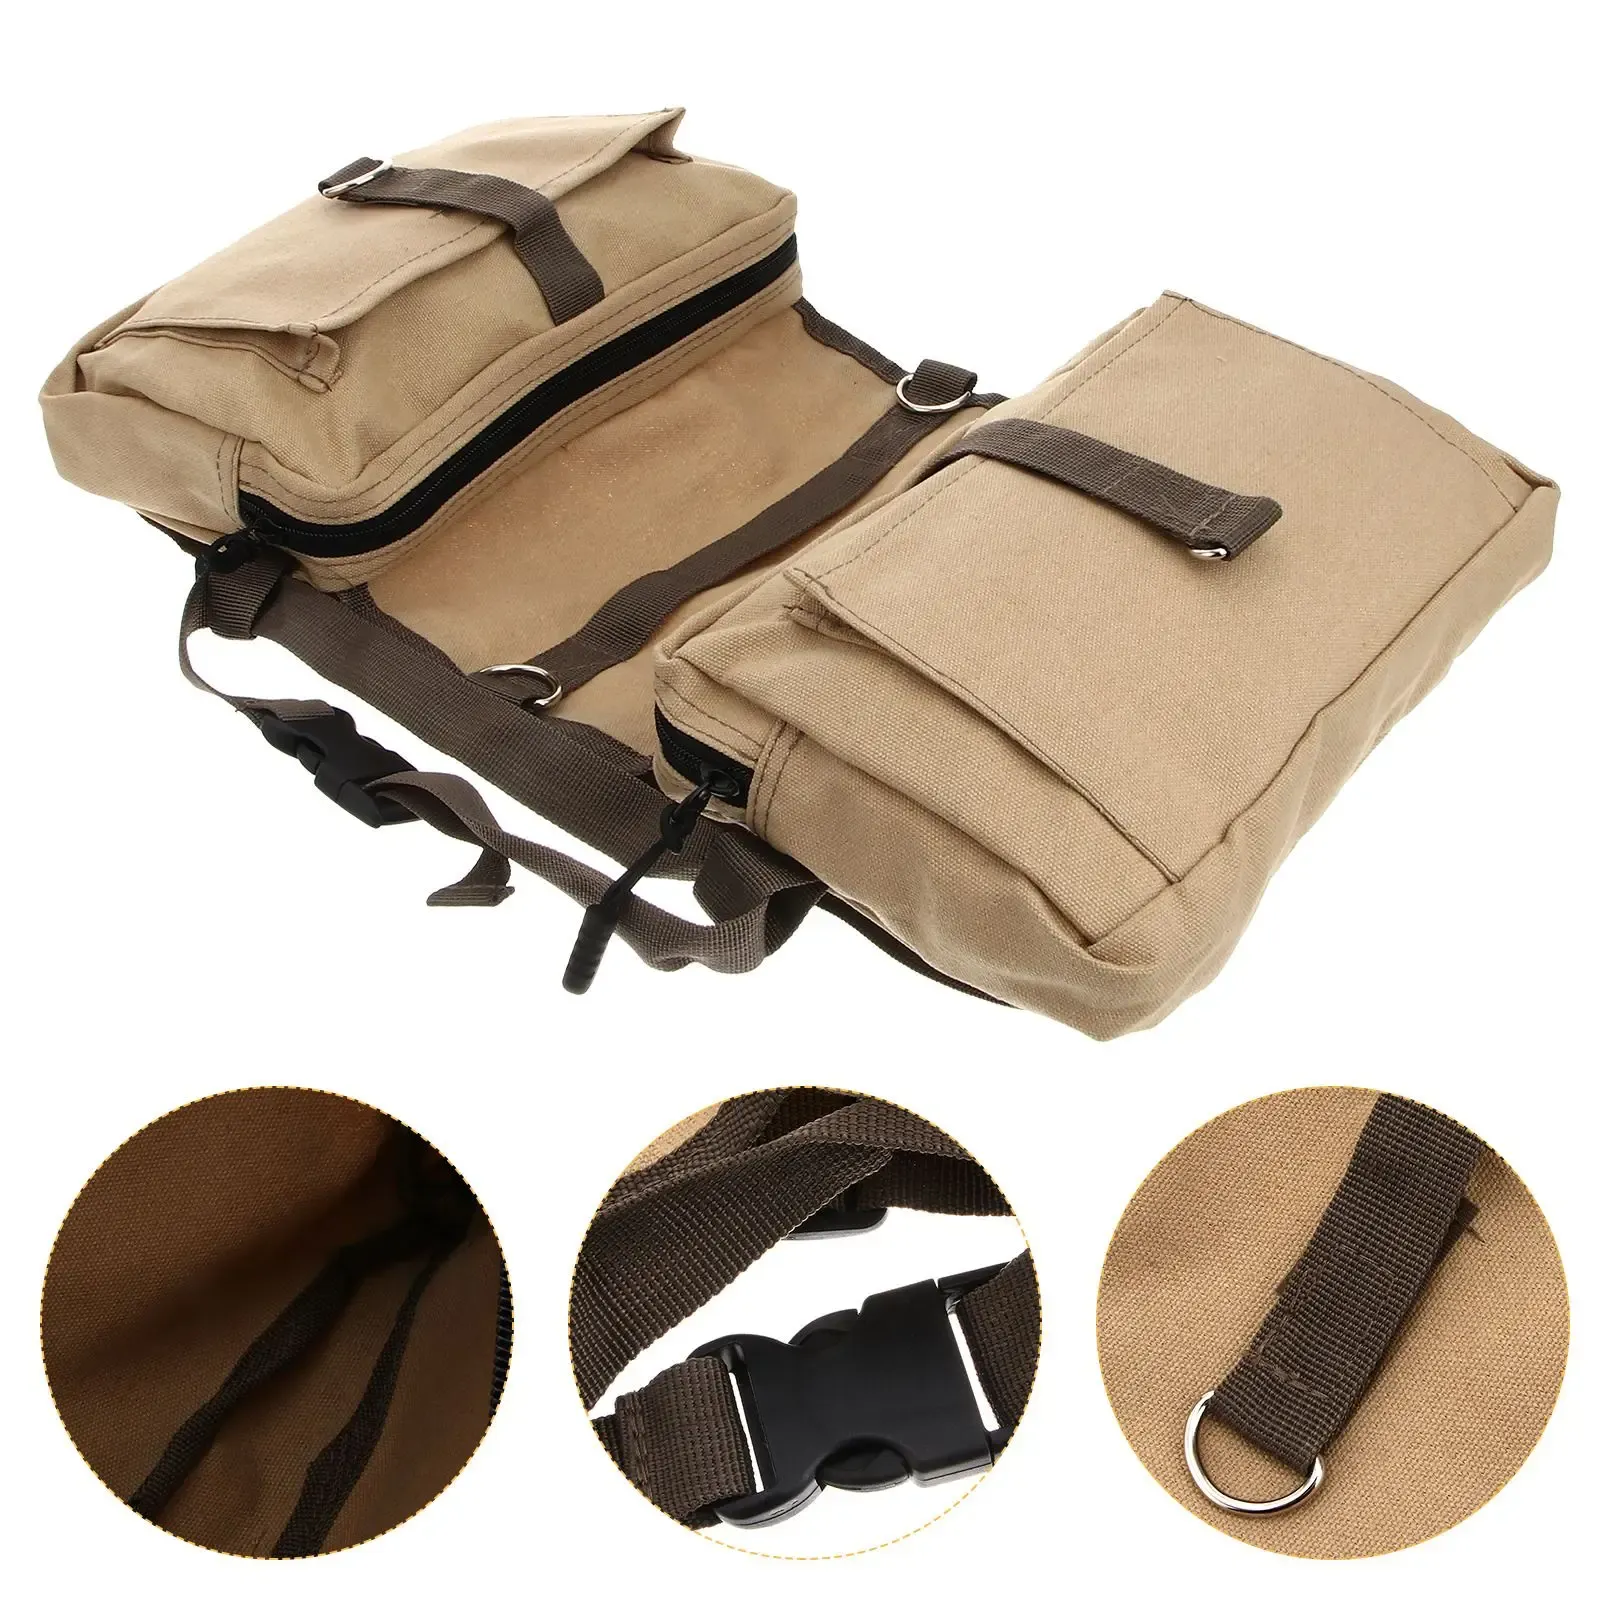 Bags Day Packs For Traveling Dog Saddle Backpack Harness Hiking Canvas Dogs Packs Khaki Wear Weighted Vest Pet Backpacks Carrying